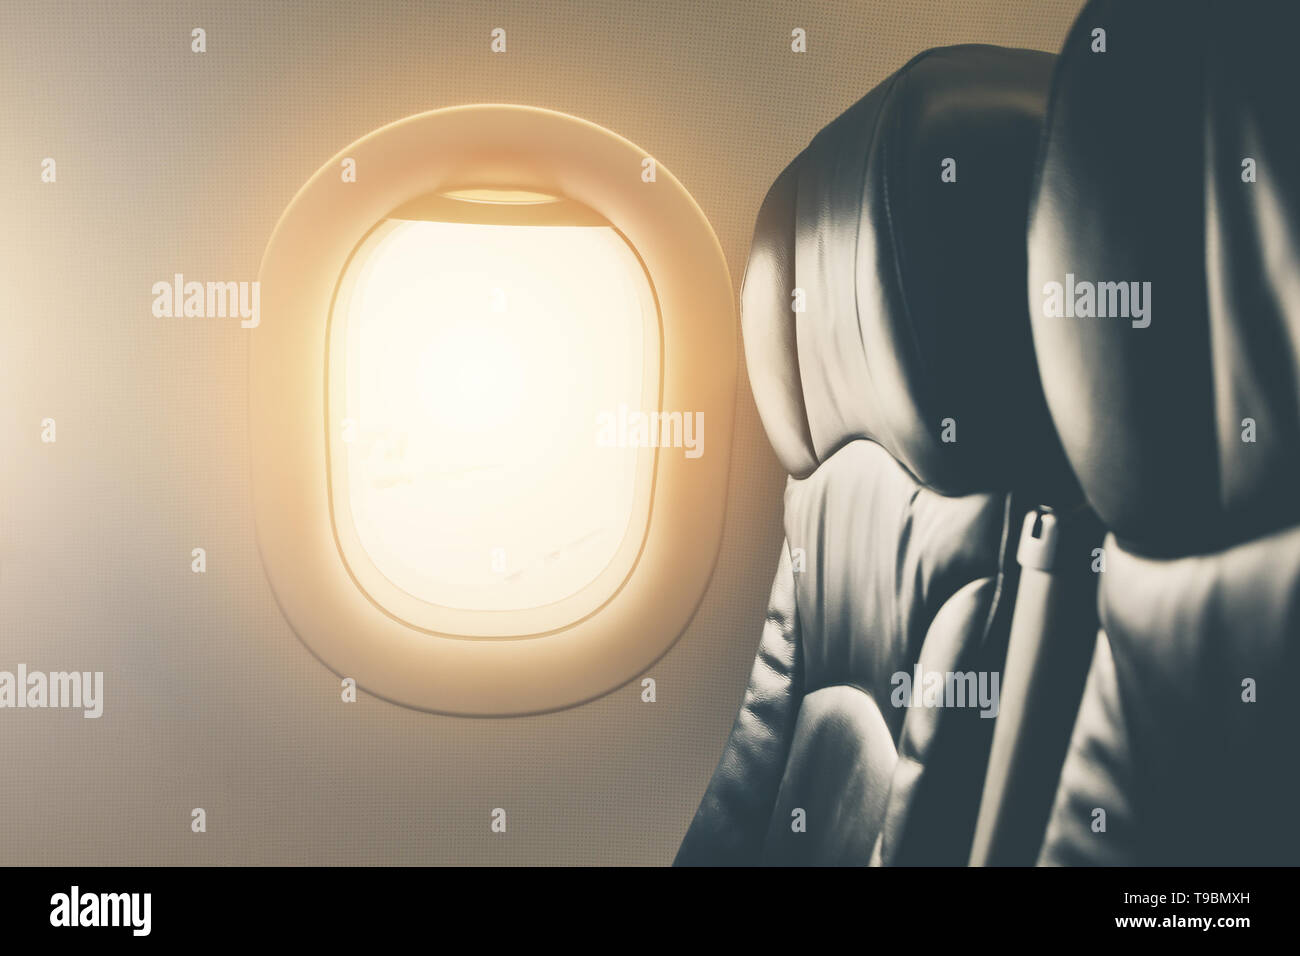 empty seat airplane window view inside an aircraft close up for flight background Stock Photo